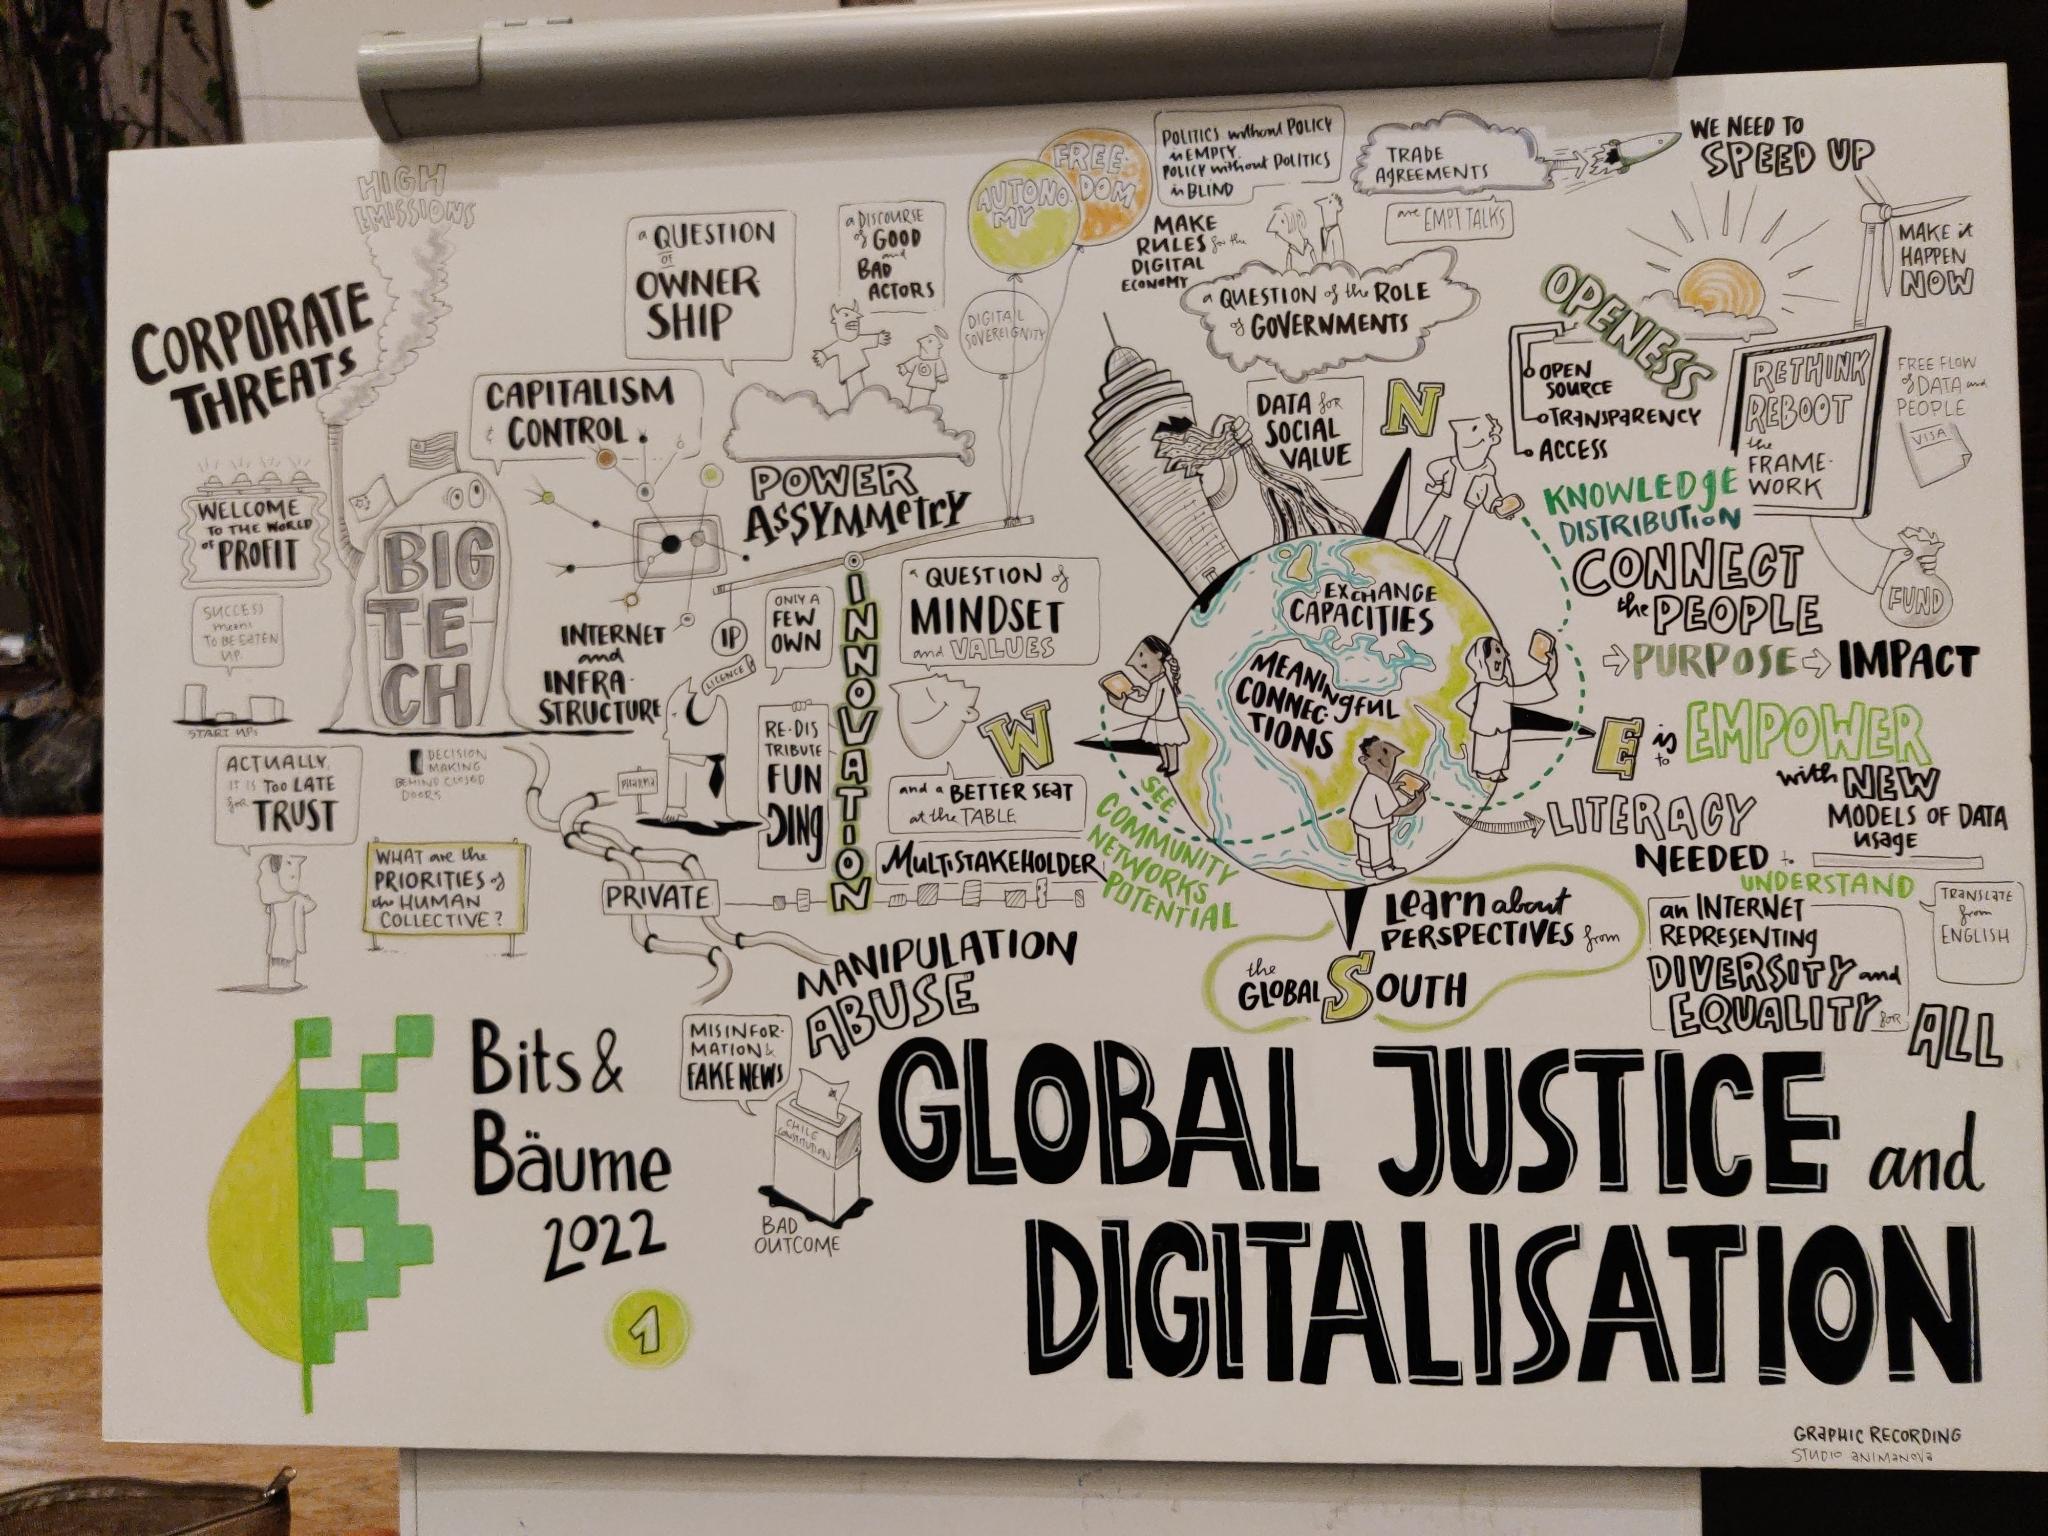 visualisation made live while the panelist discussed global justice and digitalisation.